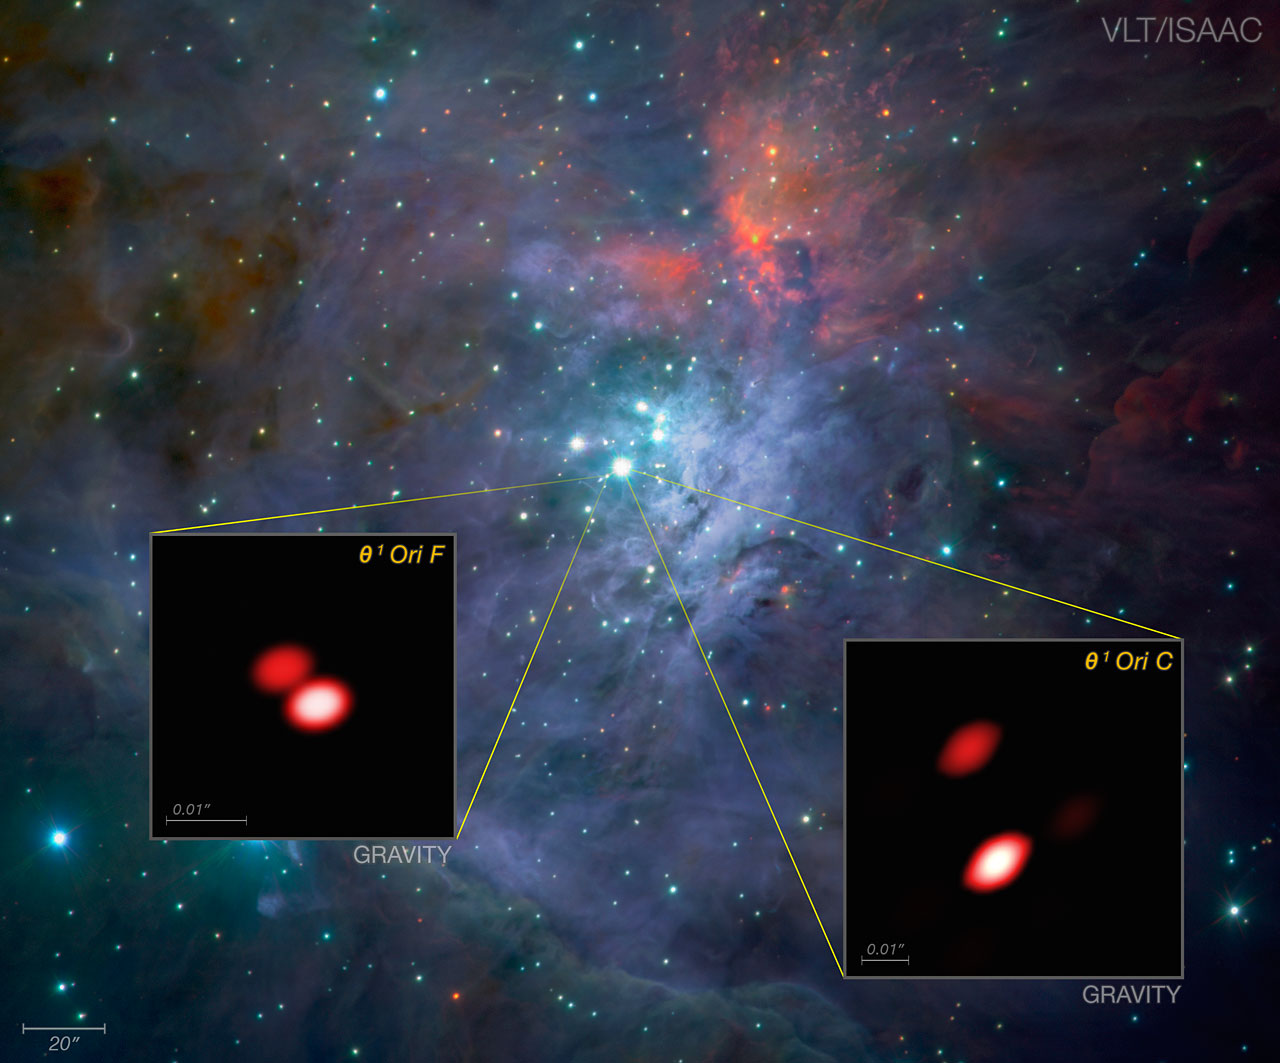 As part of the first observations with the new GRAVITY instrument the team looked closely at the bright, young stars known as the Trapezium Cluster, located in the heart of the Orion star-forming region. Already, from these first data, GRAVITY made a discovery: one of the components of the cluster (Theta1 Orionis F) was found to be a double star for the first time. The brighter known double star Theta1 Orionis C is also well seen. The background image comes from the ISAAC instrument on ESO's Very Large Telescope. The views of two of the stars from GRAVITY, shown as inserts, reveal far finer detail than could be detected with the NASA/ESA Hubble Space Telescope.